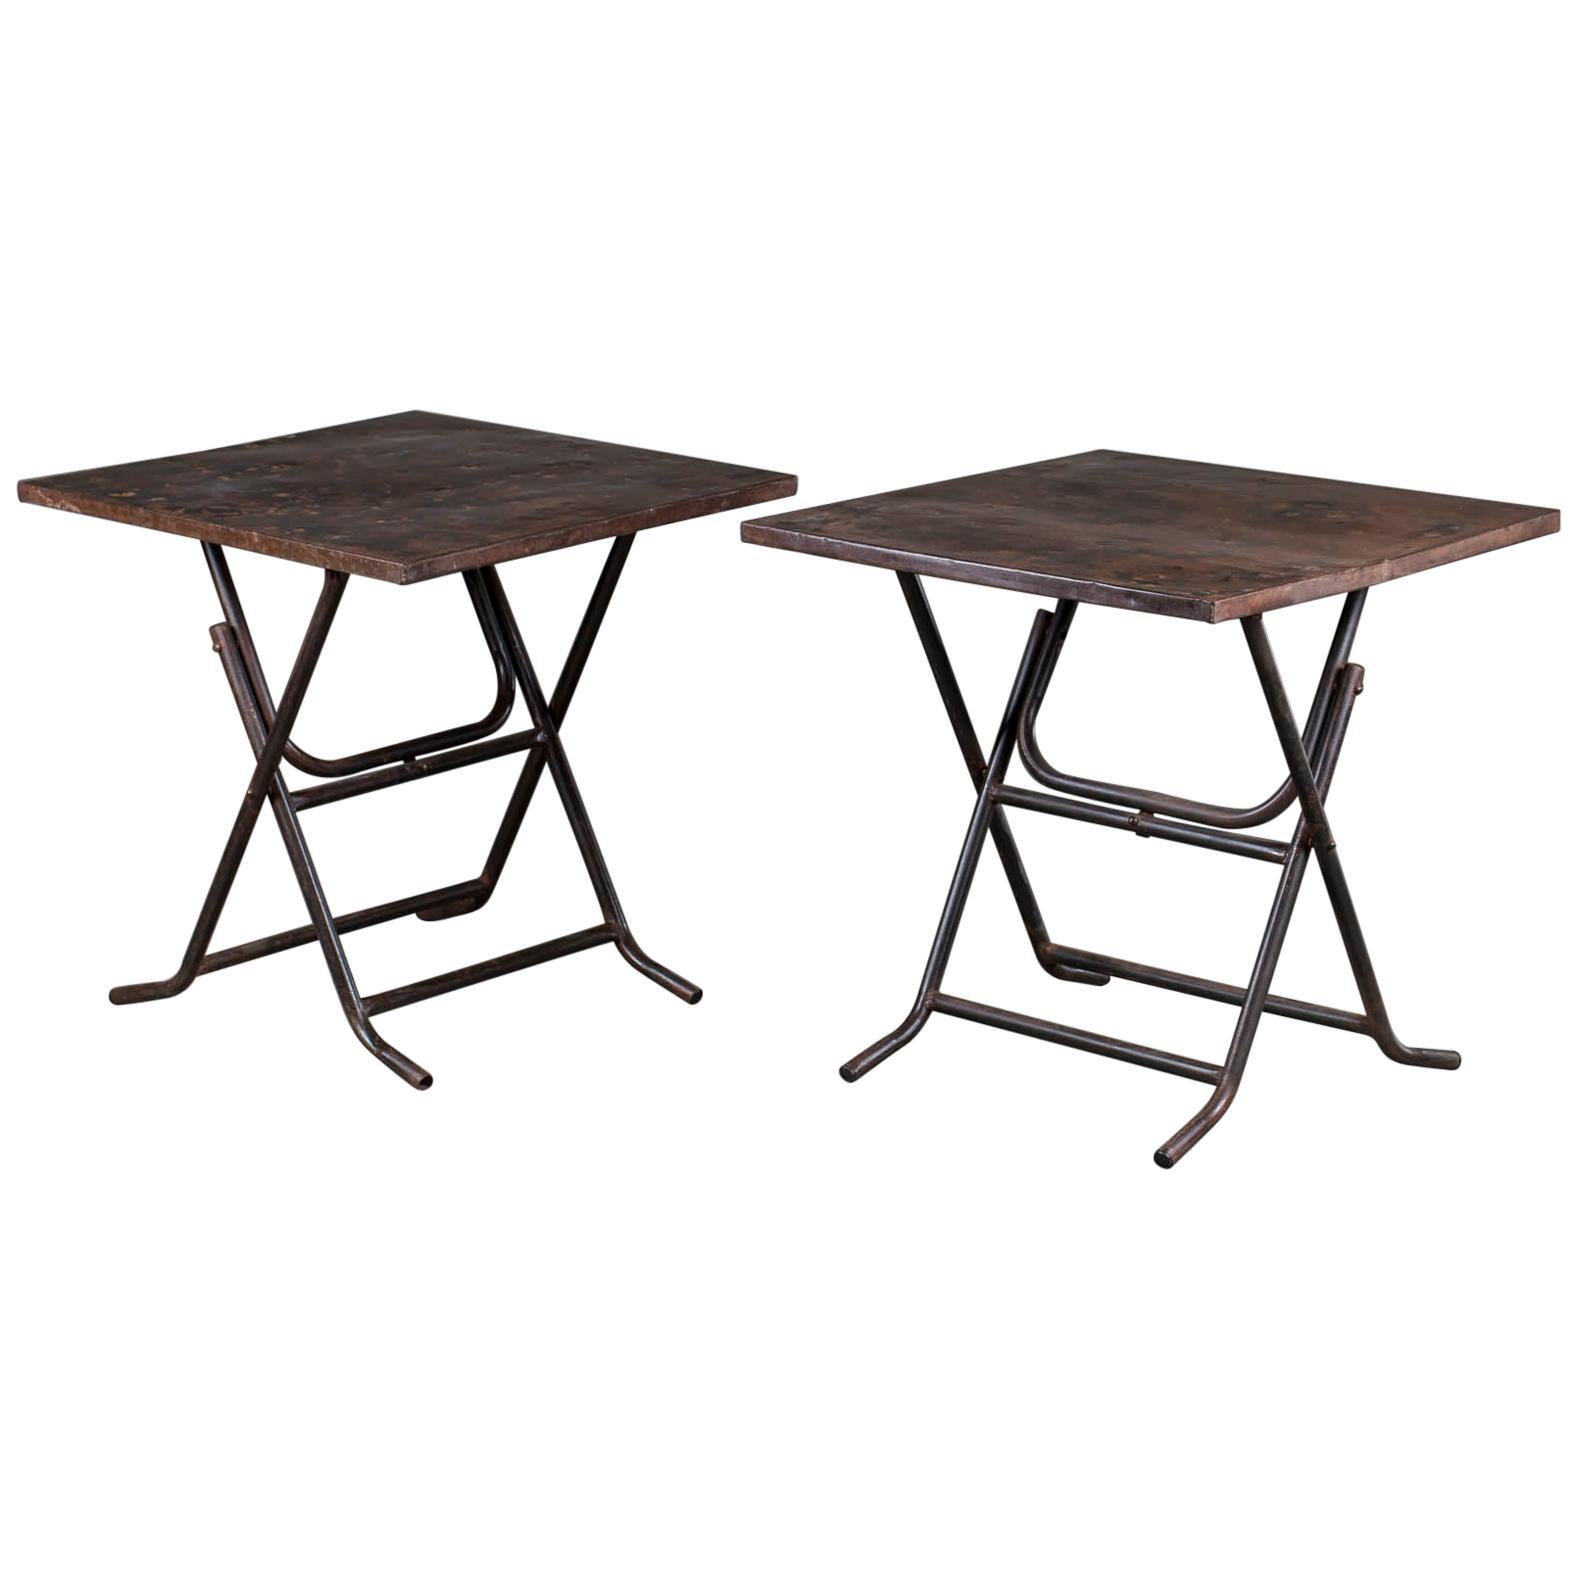 Pair of Square Metal Folding Tables Tubular Metal Legs Found in Asia